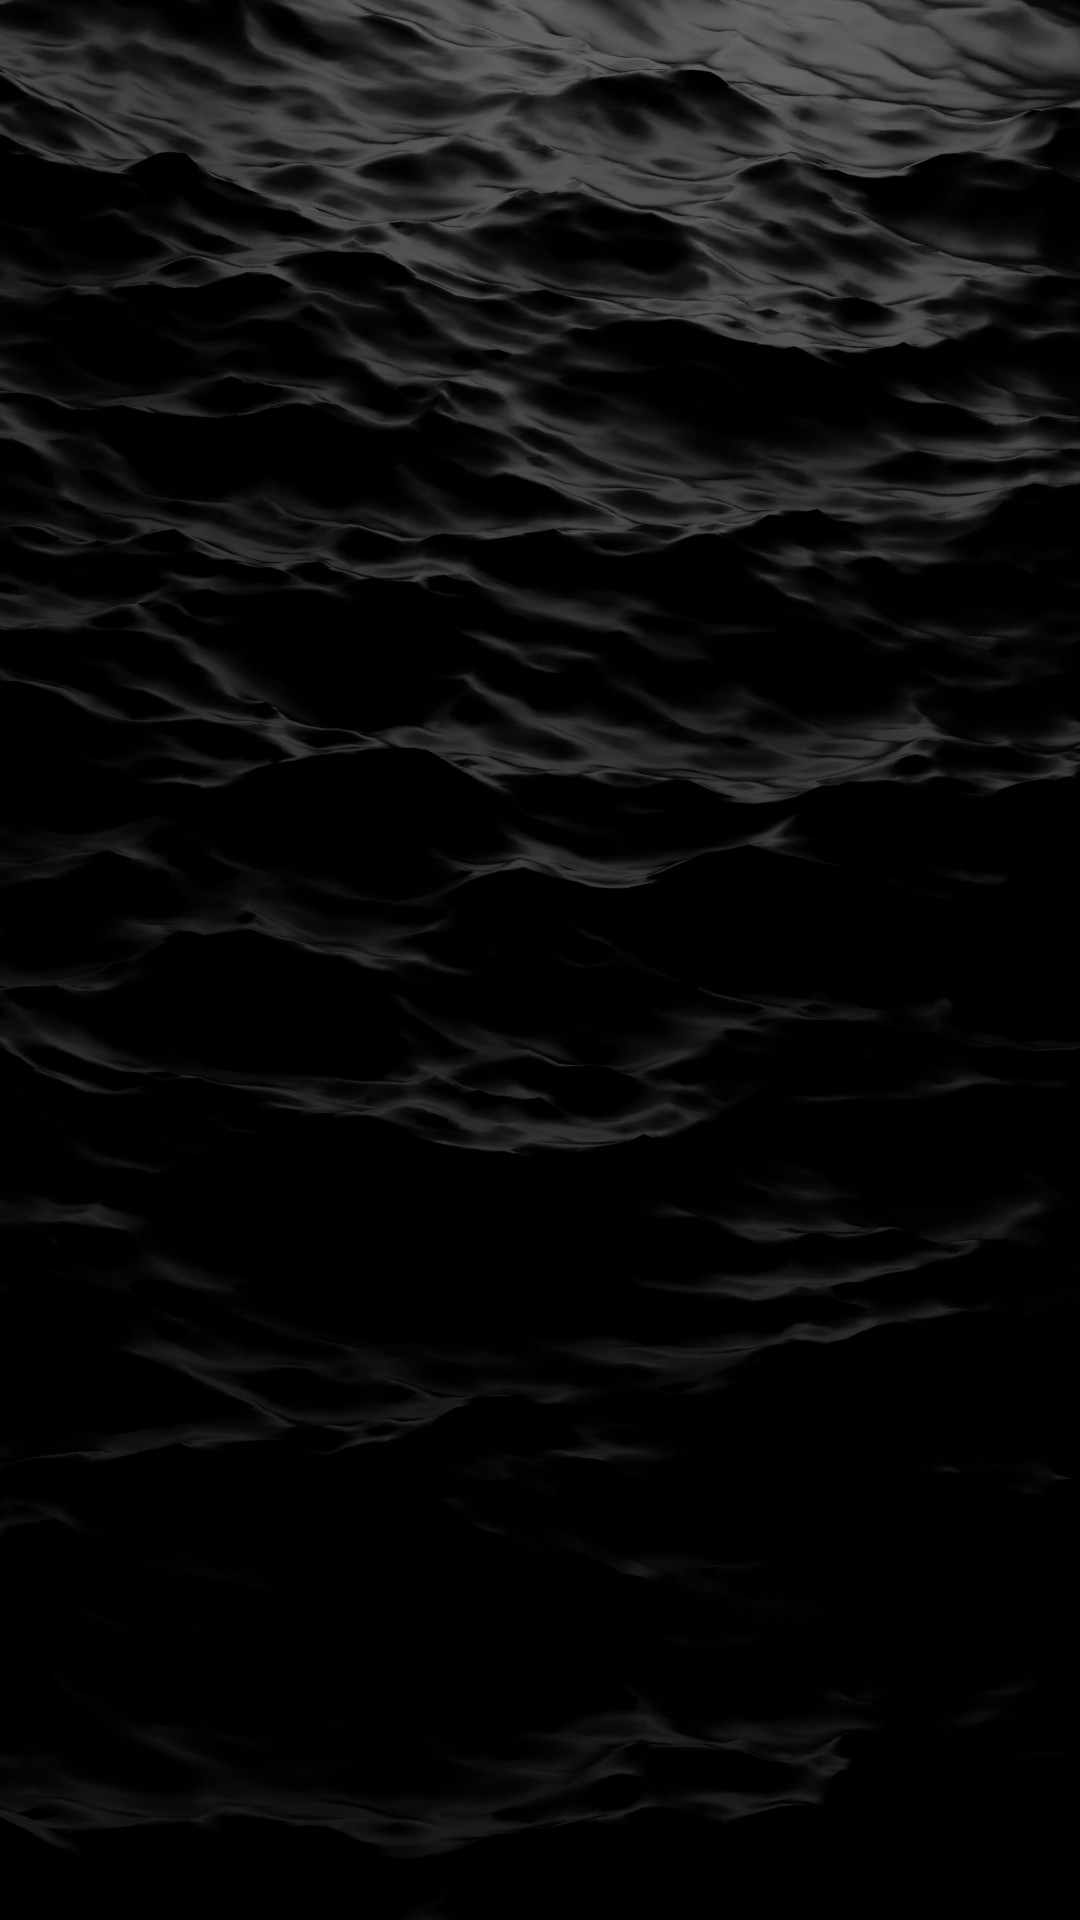 1080x1920 Dark wallpapers to compliment your new iPhone 7